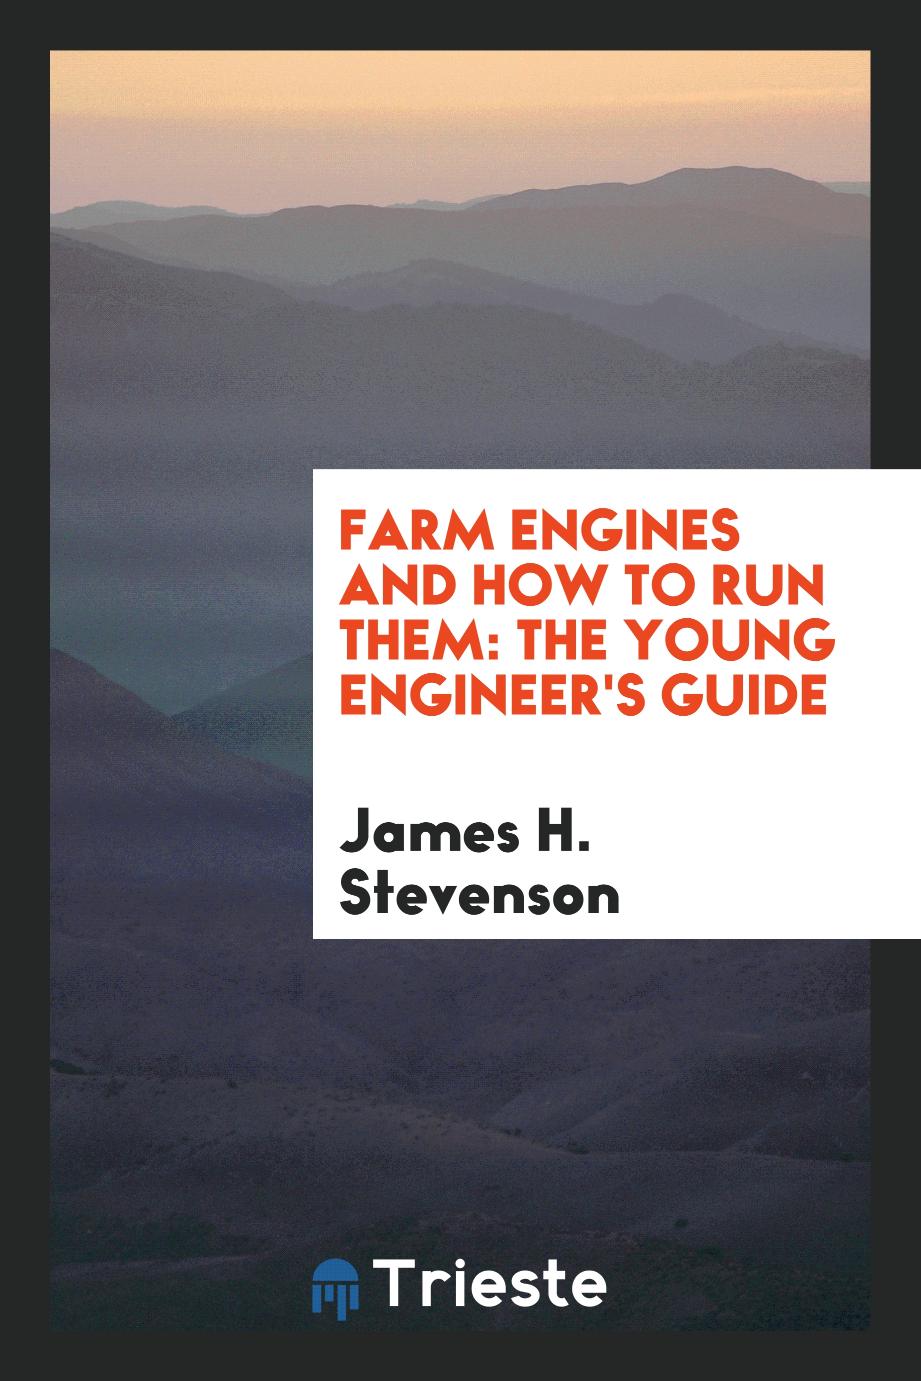 Farm engines and how to run them: the young engineer's guide